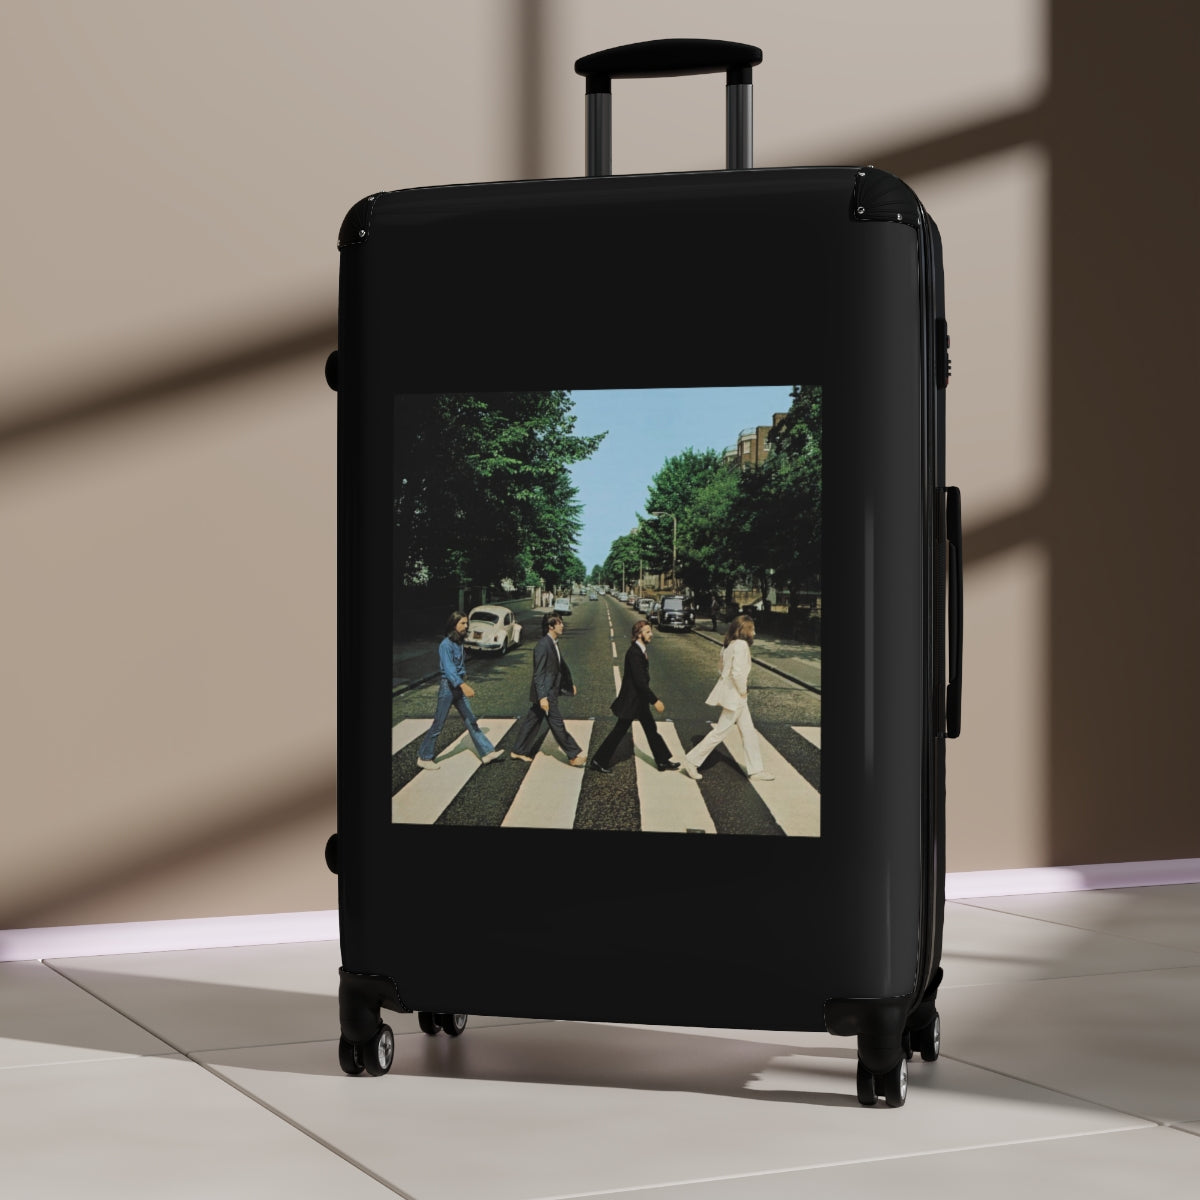 Getrott The Beatles Abbey Road 1969 Black Cabin Suitcase Inner Pockets Extended Storage Adjustable Telescopic Handle Inner Pockets Double wheeled Polycarbonate Hard-shell Built-in Lock